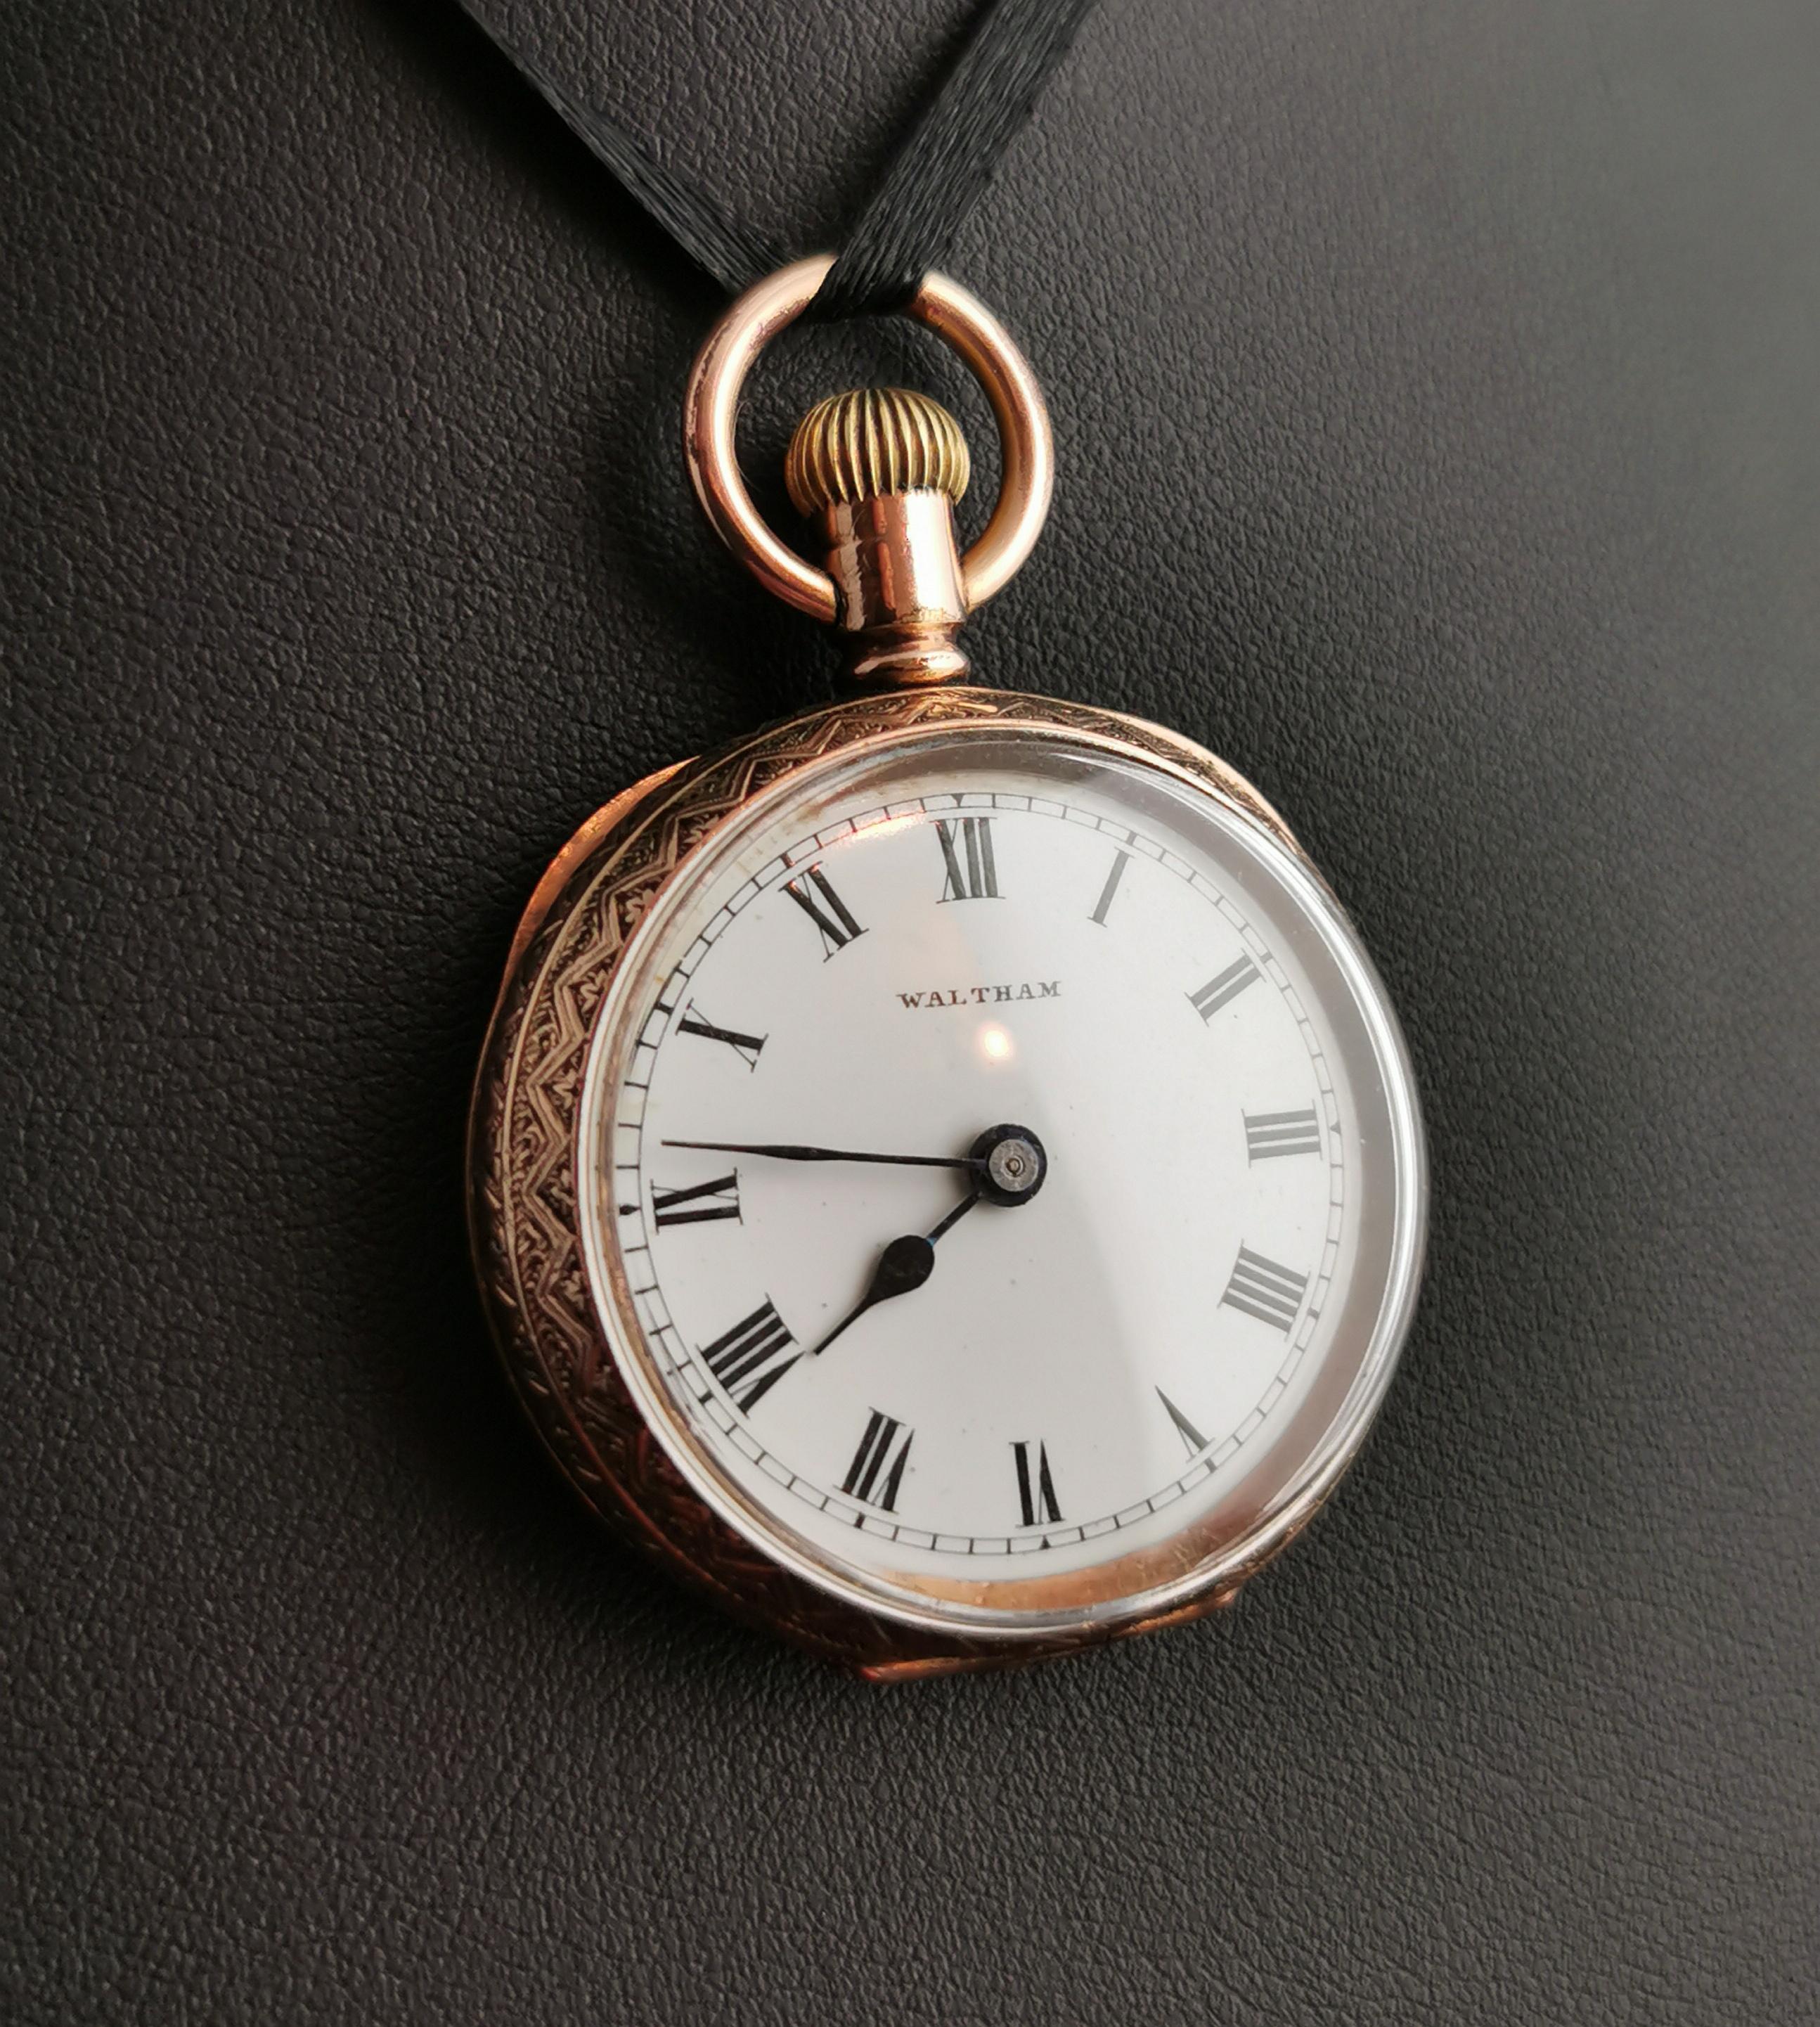 Women's Antique Edwardian Fob Watch, Gold Plated, Waltham